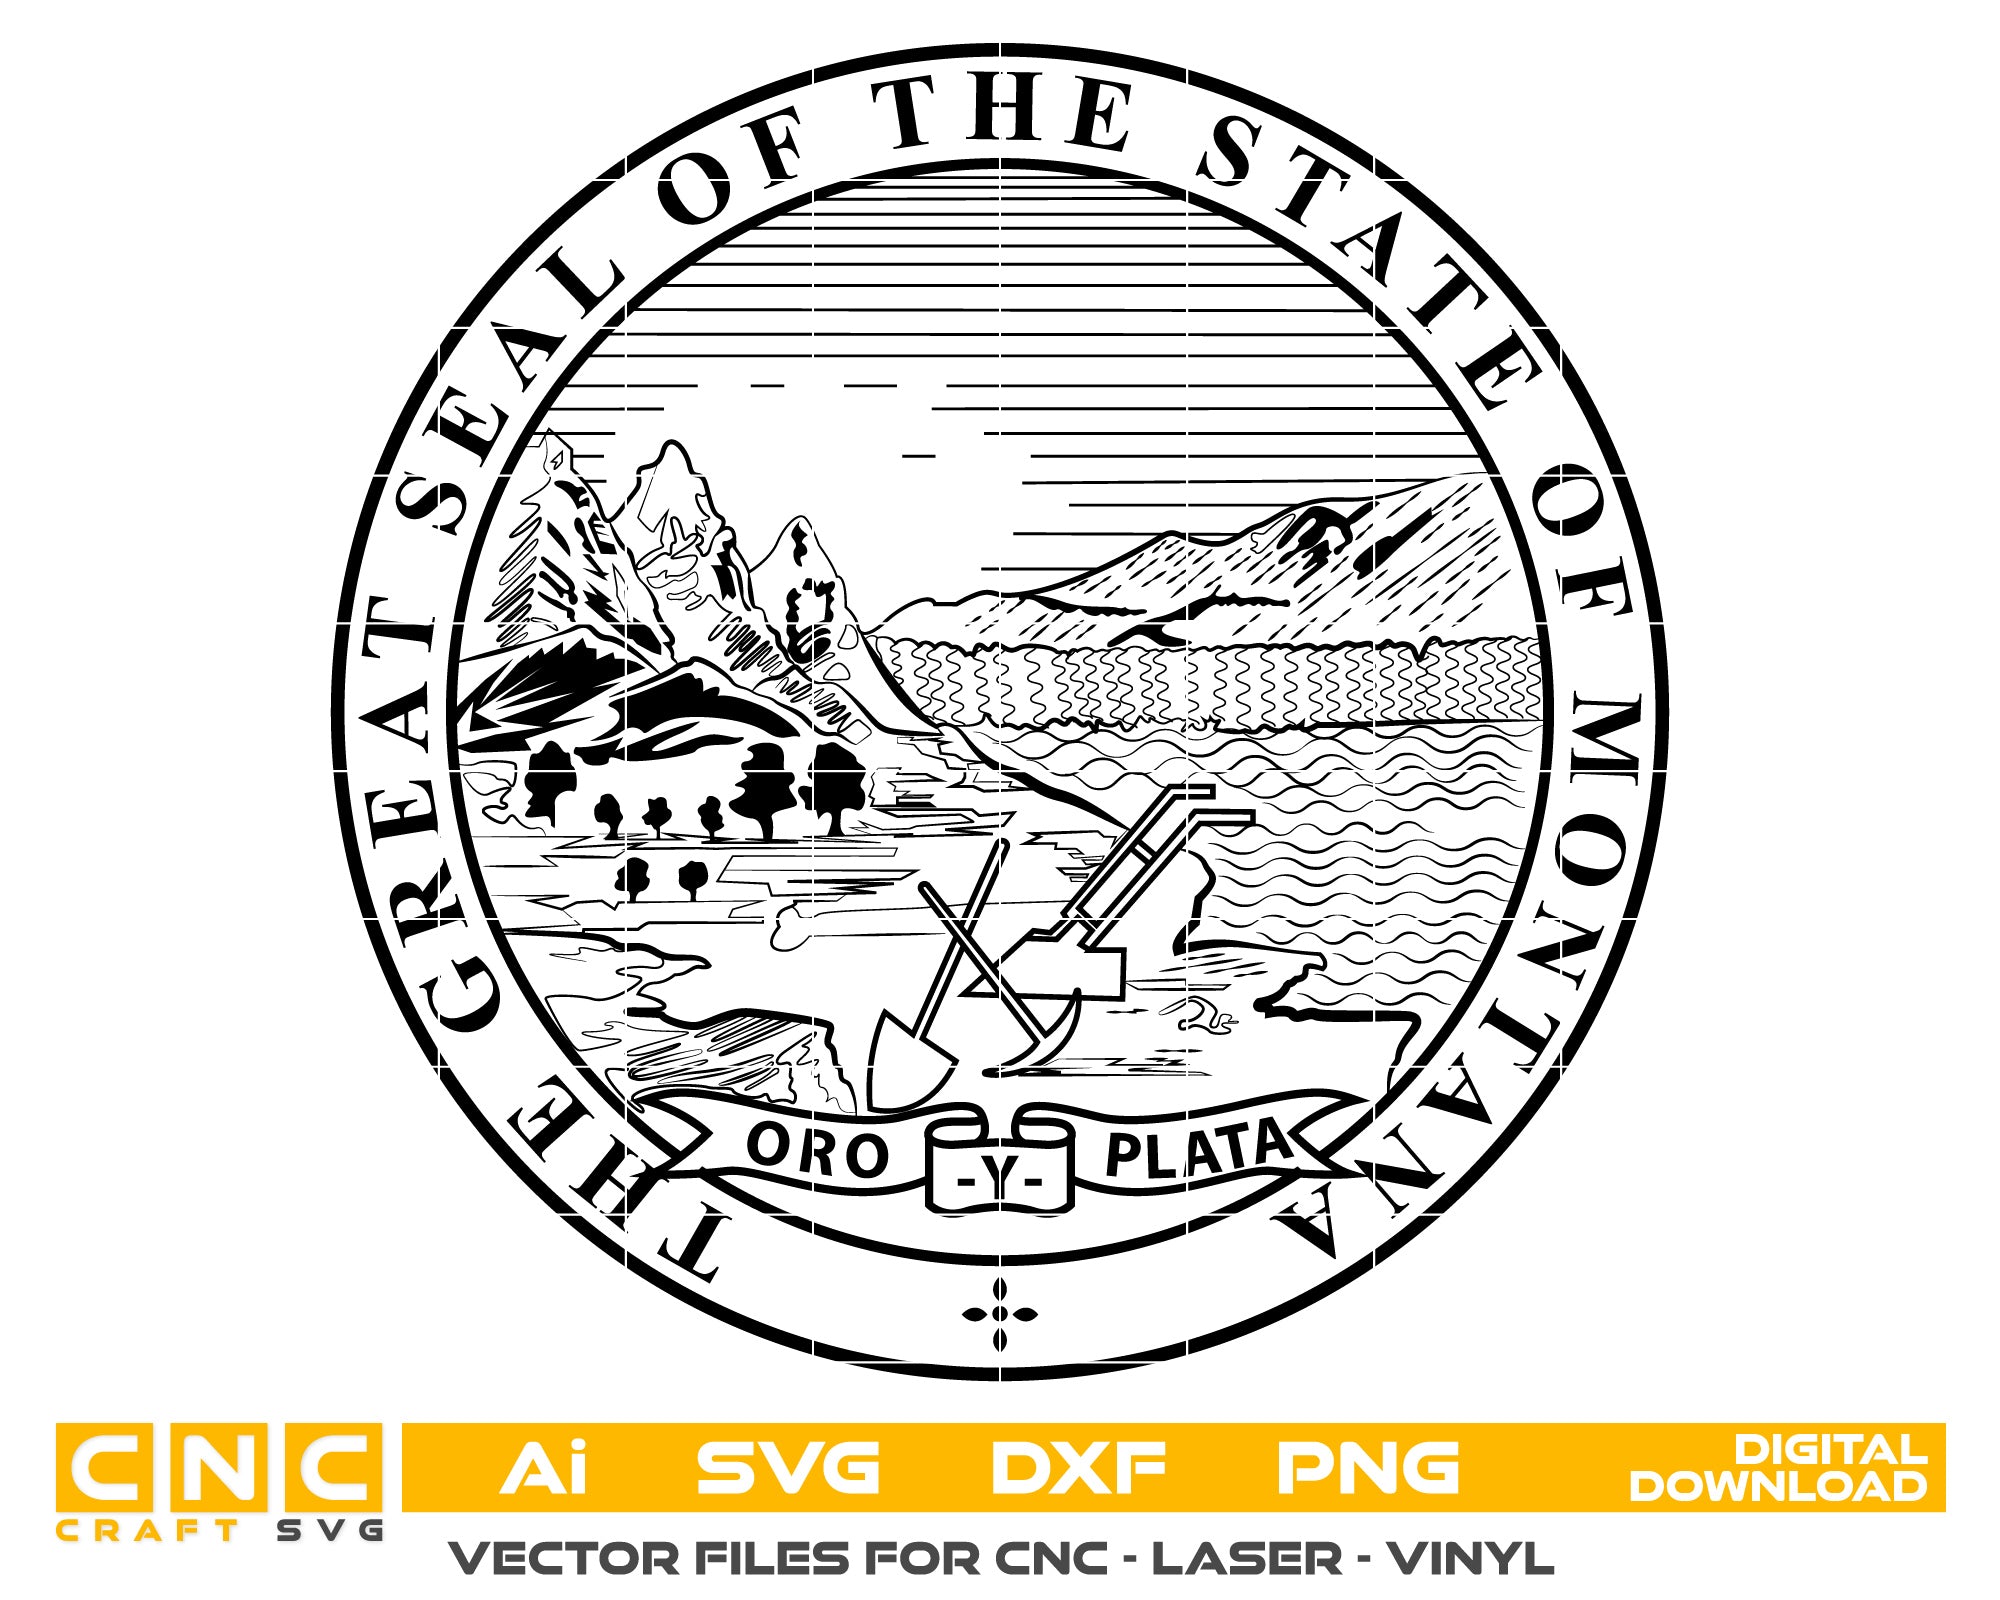 State of Montana Seal vector file